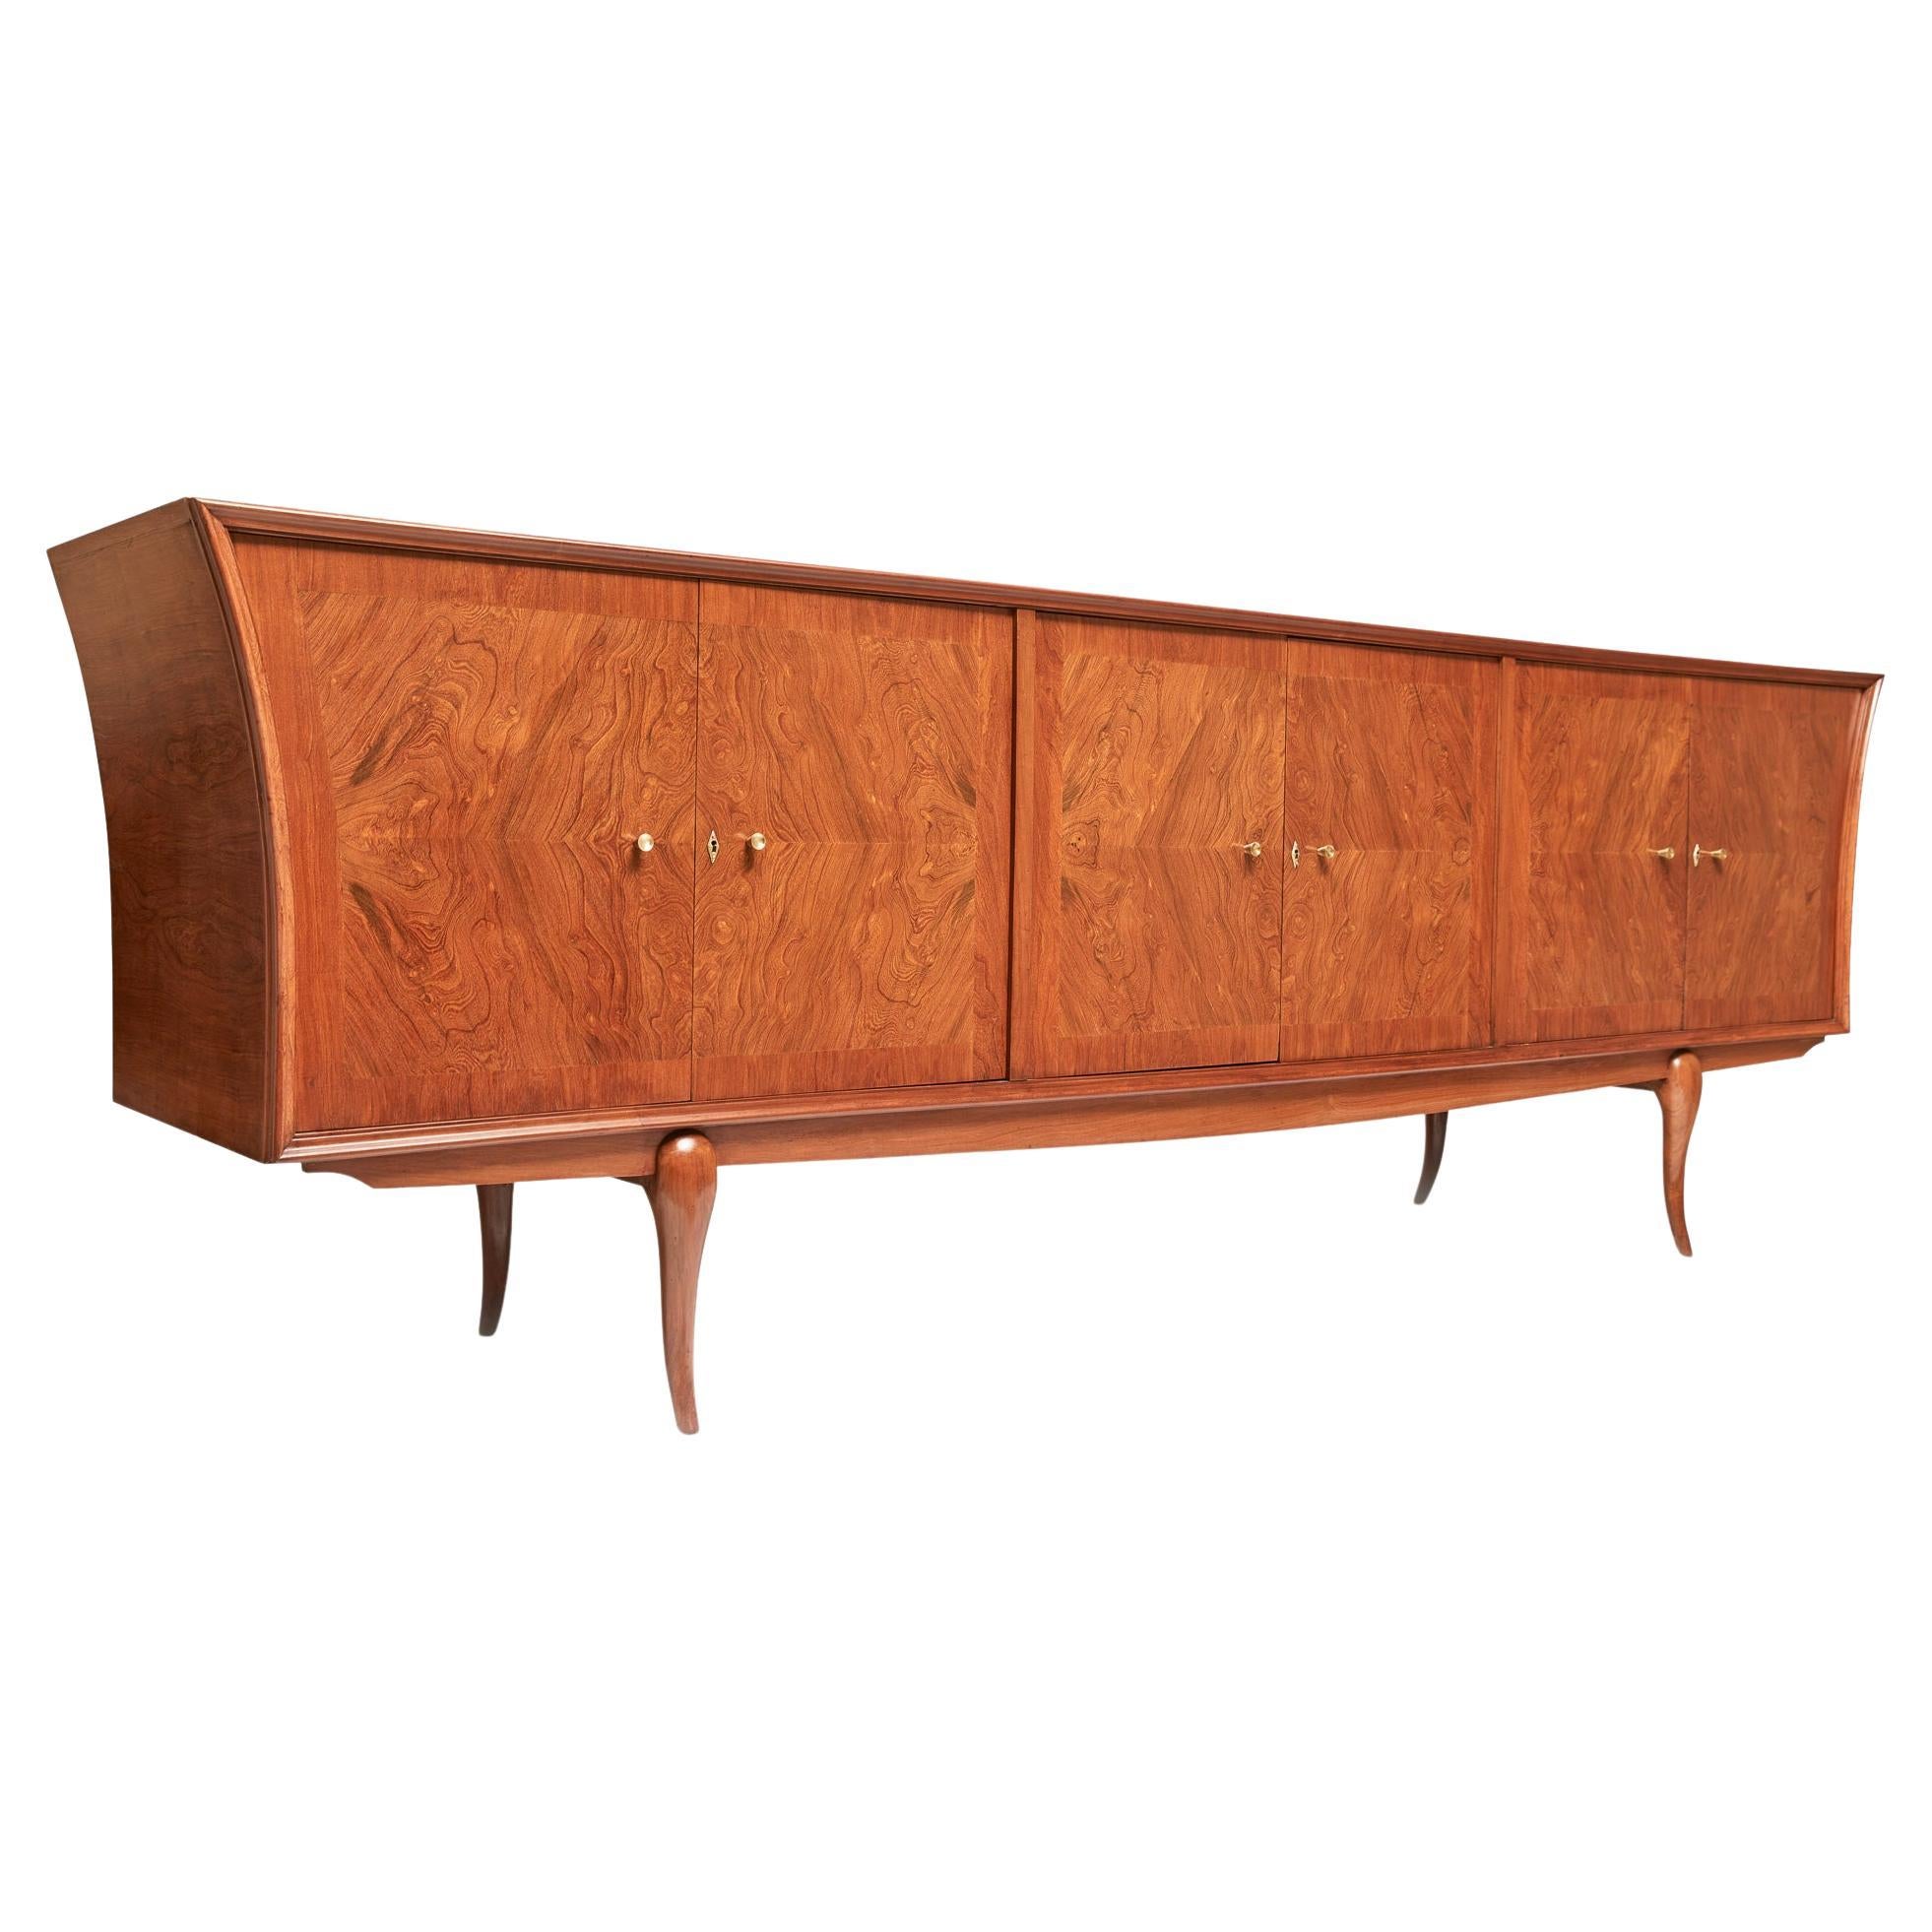 Available today, this magnificent Mid-Century Modern credenza is entirely made of Caviuna hardwood and consists of six doors, three storage cabinets, six shelves and four drawers. The sides are curved and the structure rests on four legs. The wood